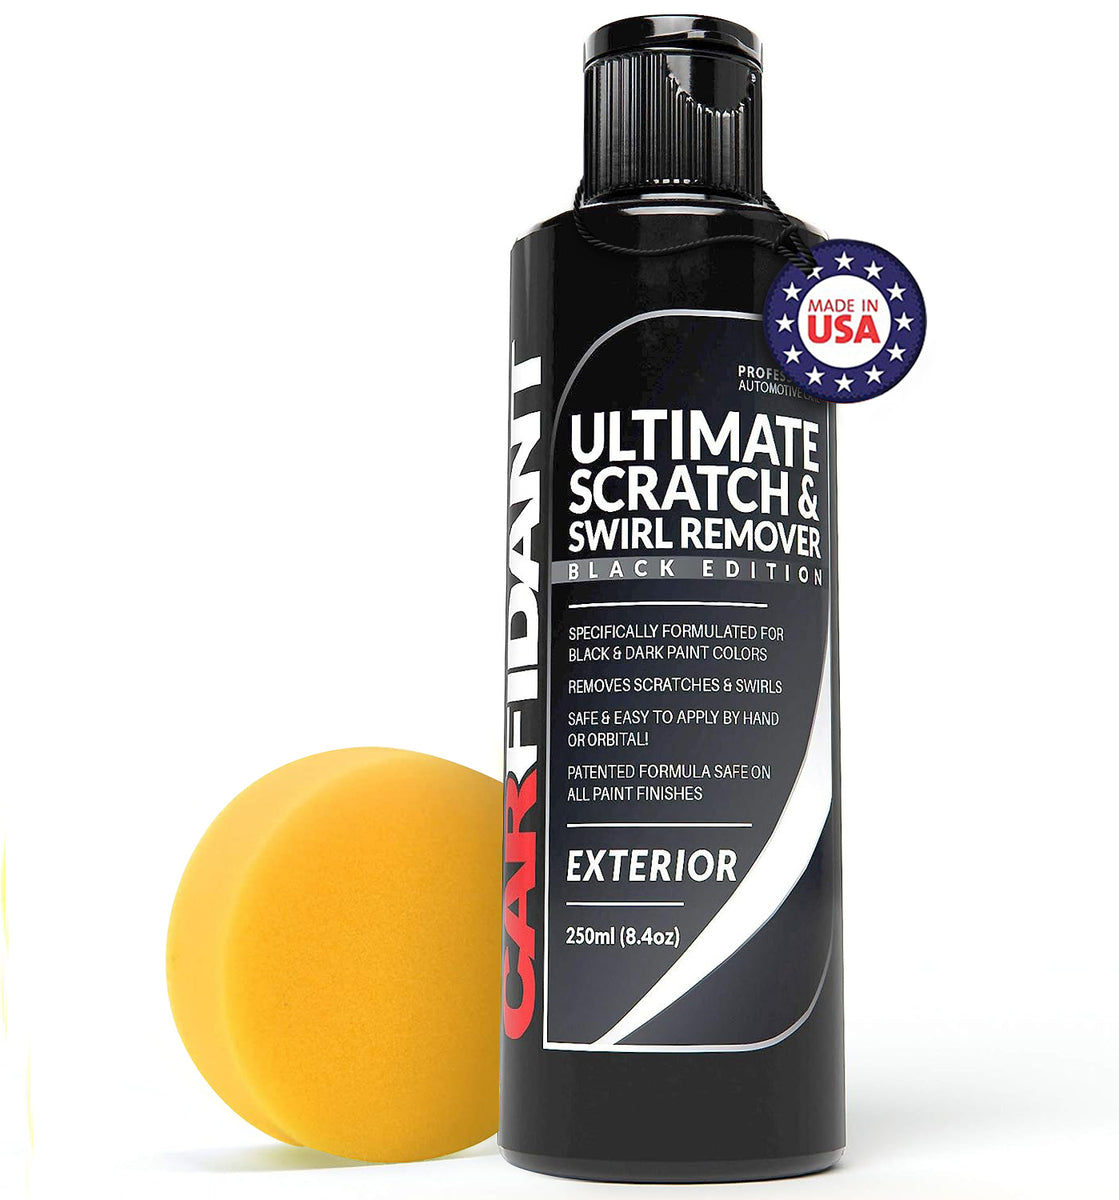 Erase Car Scratches With Sponge, Car Scratch Remover, Car Water Spot Remover  For Cars, Black Car Scratch Remover Vehicles, Polish & Paint Restorer, Ea